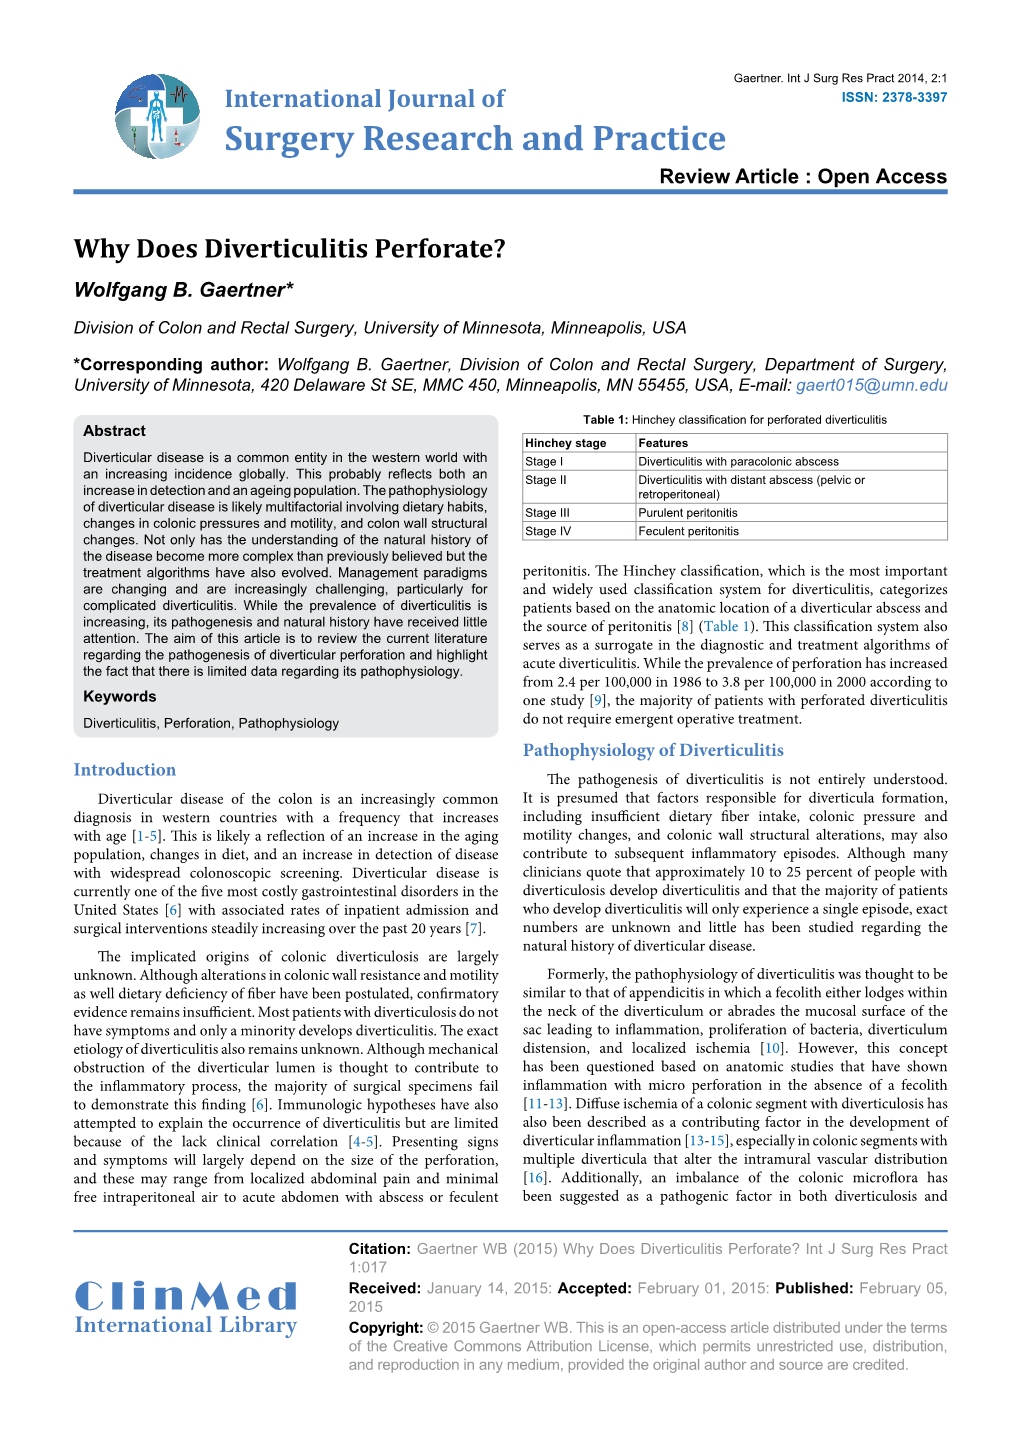 Why Does Diverticulitis Perforate? Wolfgang B